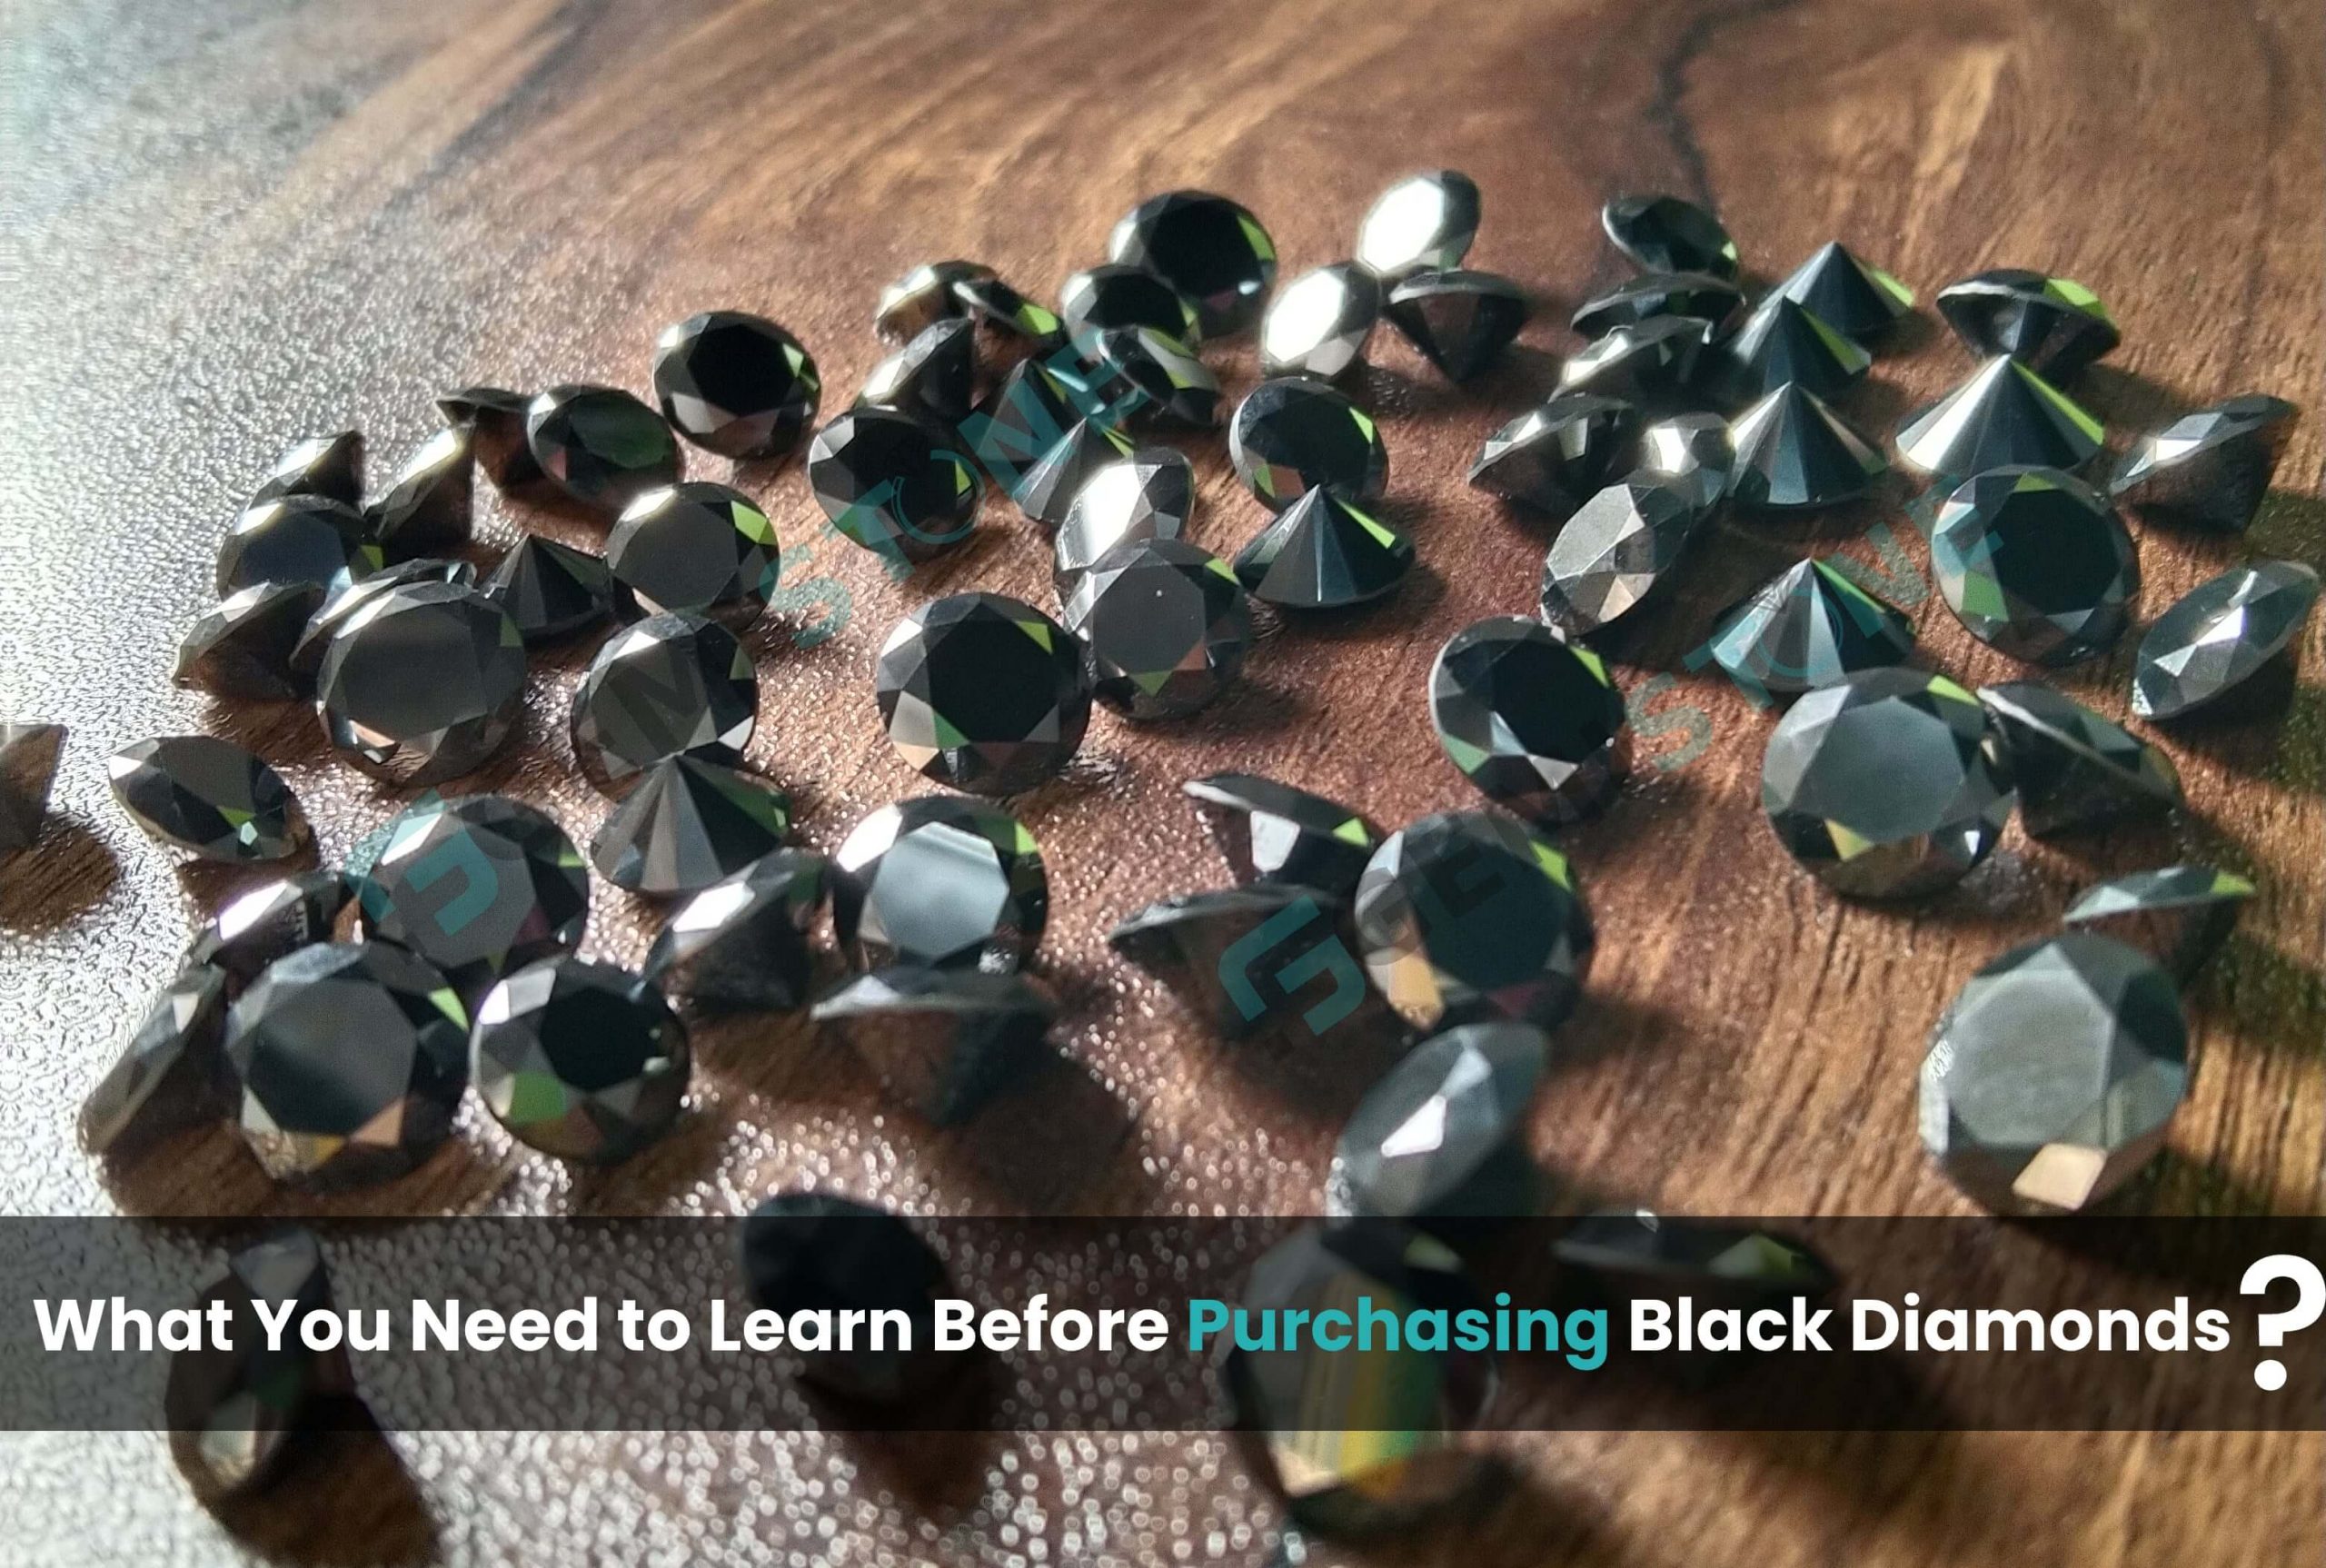 What You Need to Learn Before Purchasing Black Diamonds at Gemistone